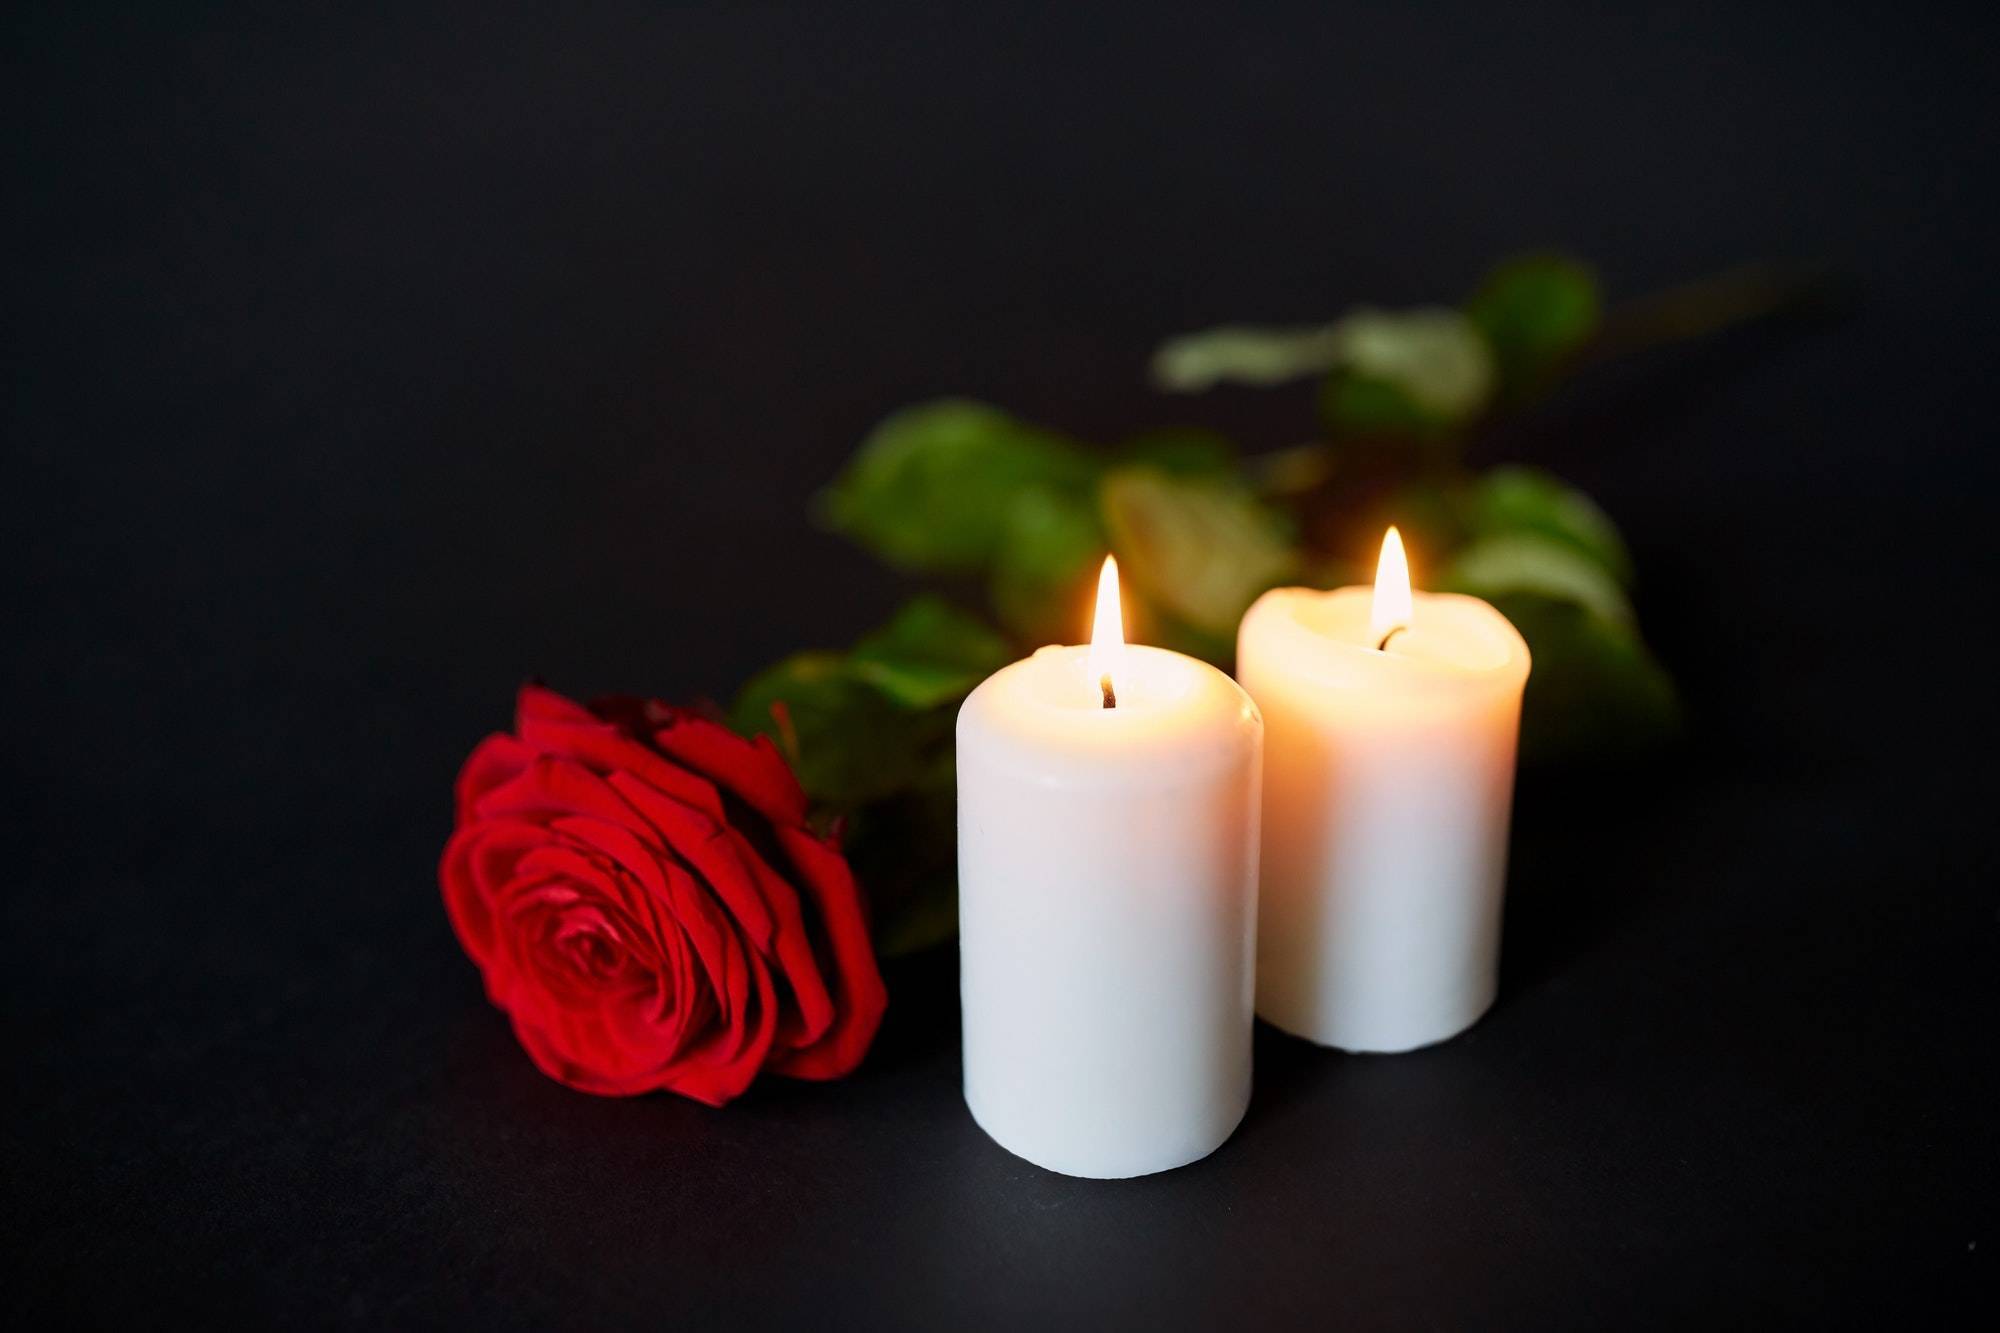 red rose and burning candles over black background